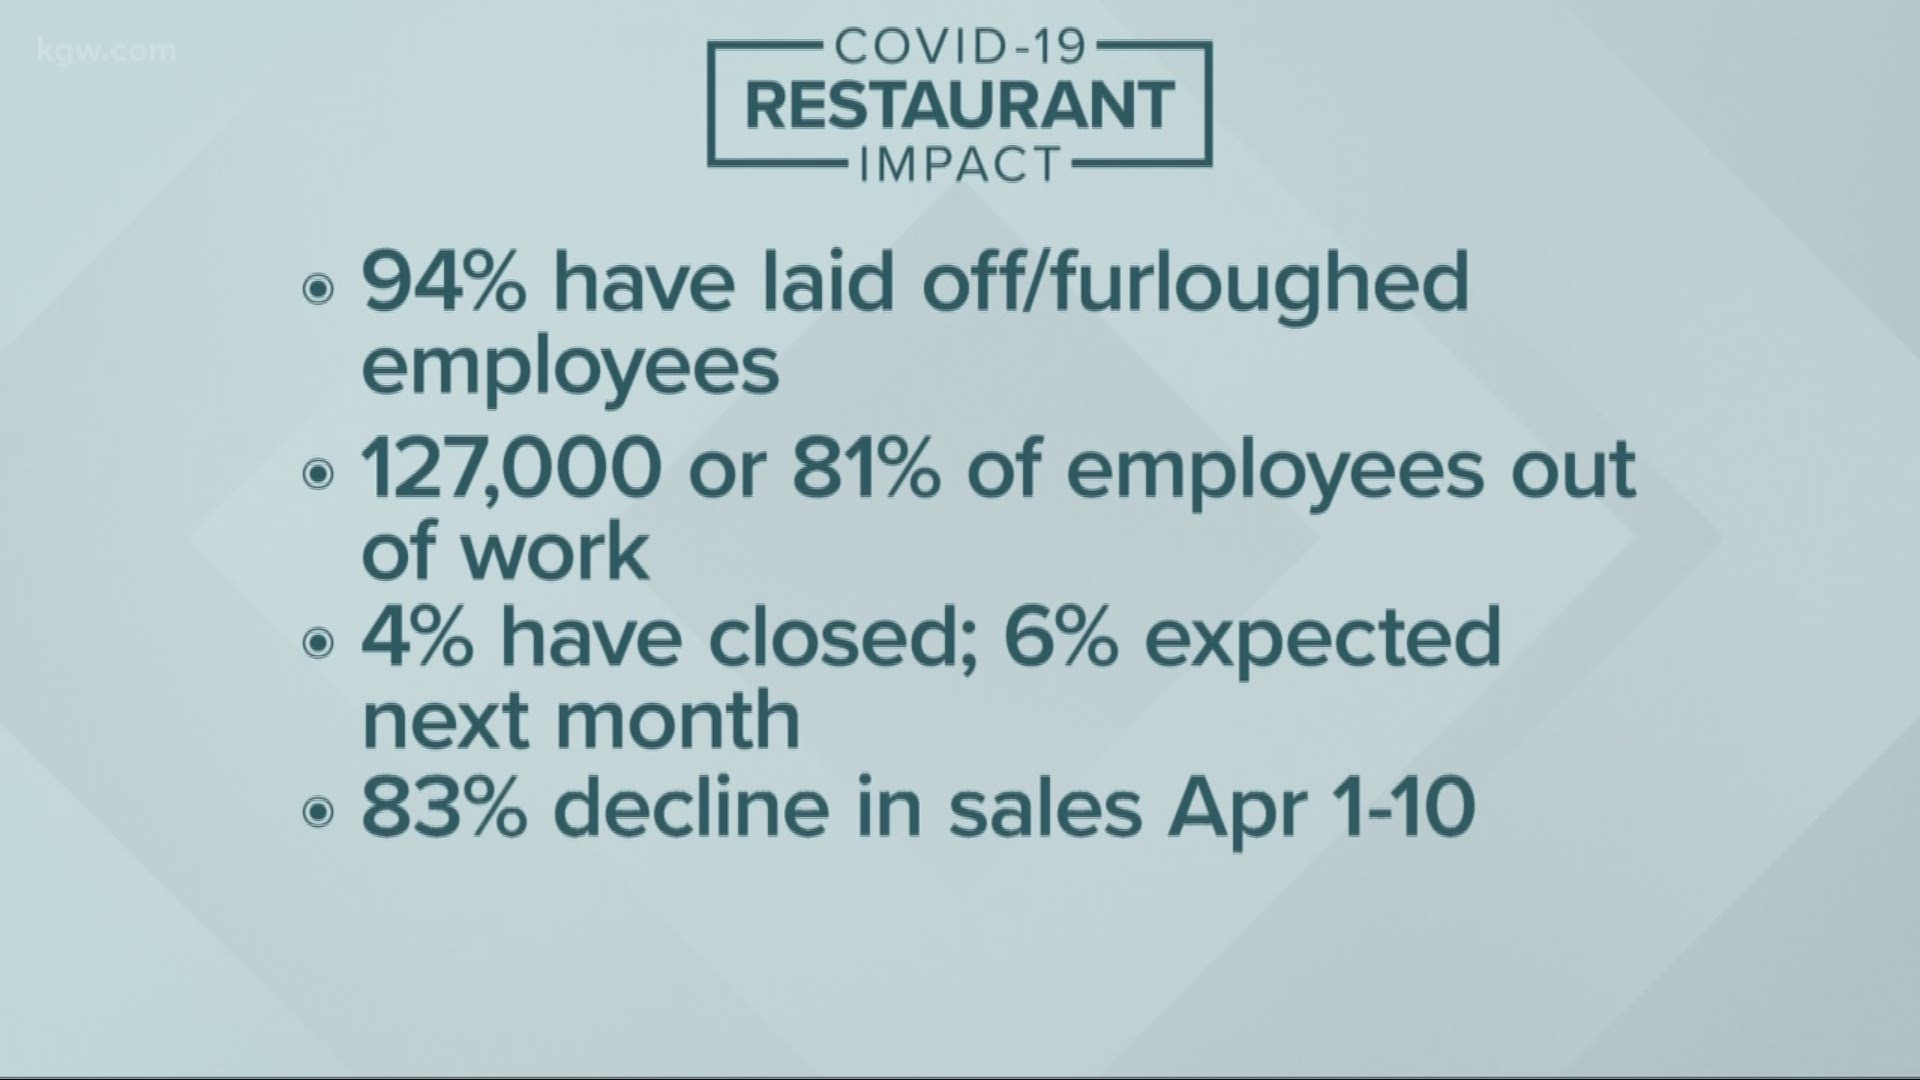 More than 120,000 restaurant employees in Oregon are out of work because of the pandemic.